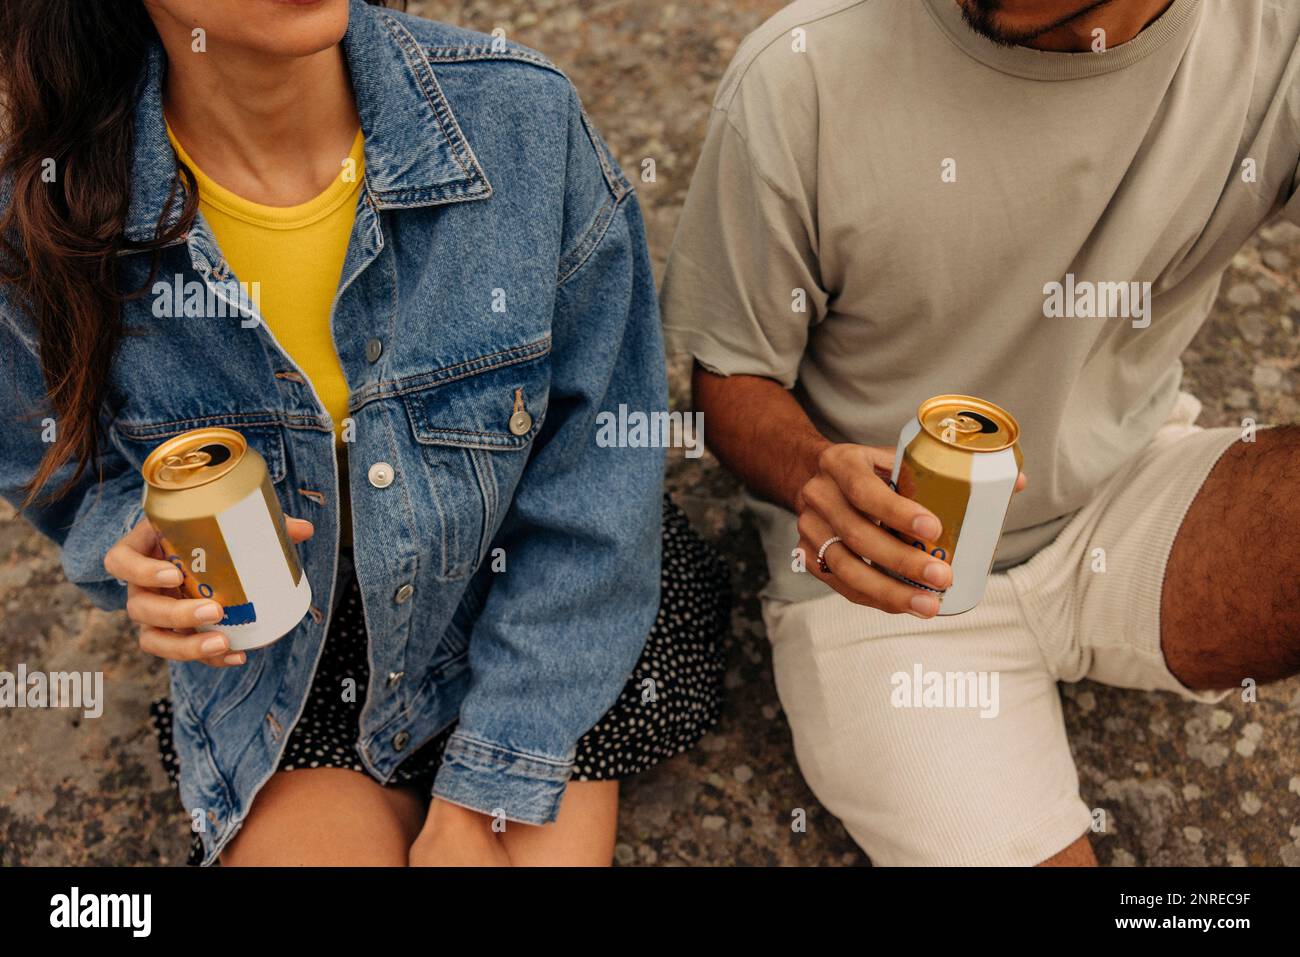 Midsection of male and female friends holding drink cans while sitting together on rock Stock Photo